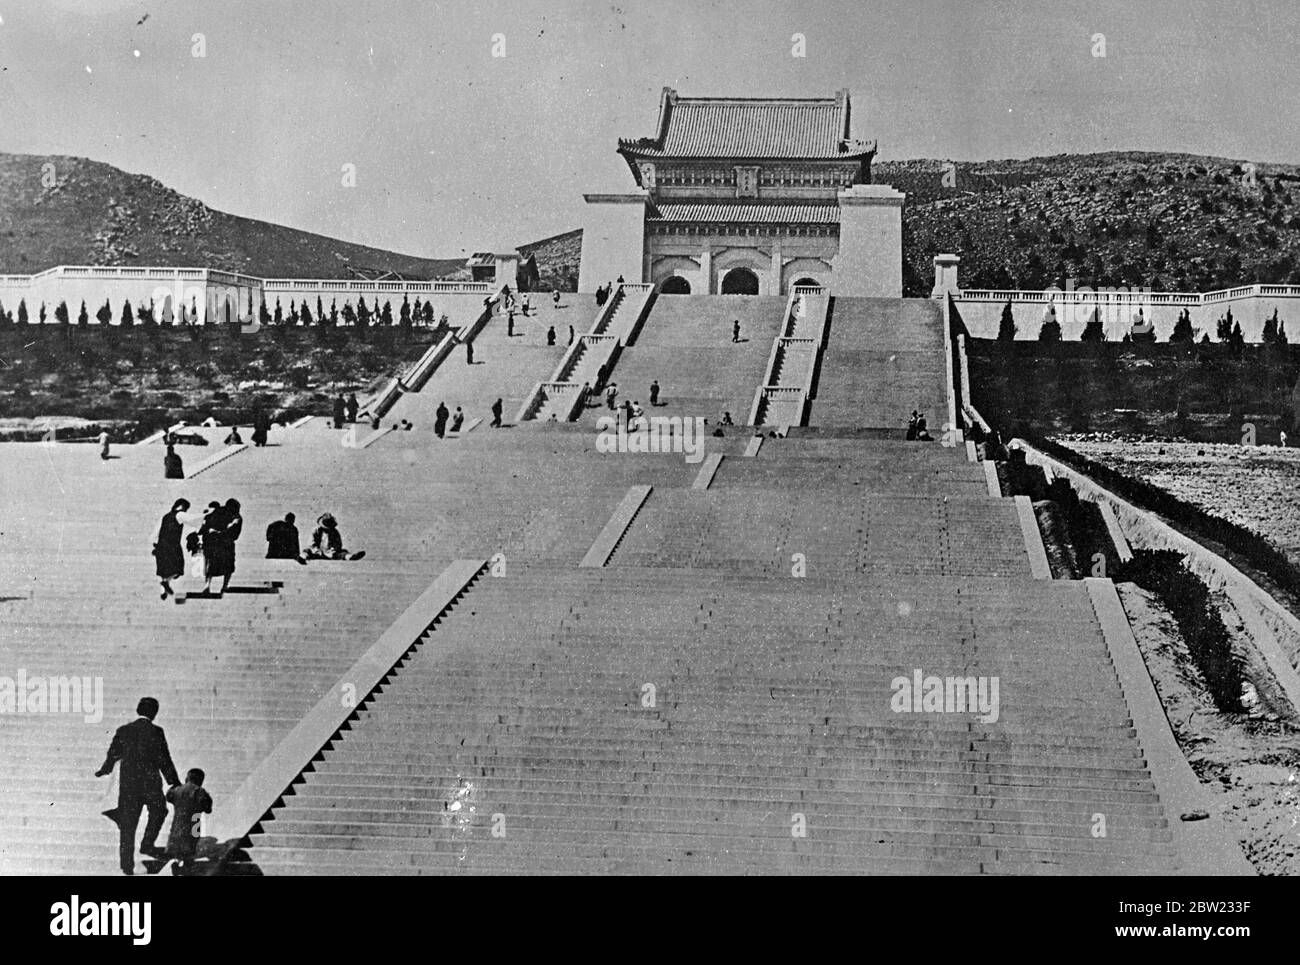 The Mausoleum on the slopes of Purple Mountain, Nanking. The monument is a revered spot to all Chinese. The population of Nanking, China's capital, is awaiting the carrying out of the threat of the Japanese commander-in-chief in Chinese waters, Vice Admiral Hasegawa, to destroy the city from the air. 54 Japanese planes have already carried out a dress rehearsal of the big raid threatened for today. There are 300 British residents in Nanking and the men are remaining at the posts. 21 September 1937 [Japanese troops who have reached the outskirts of Nanking, have planted their banner on the Purp Stock Photo